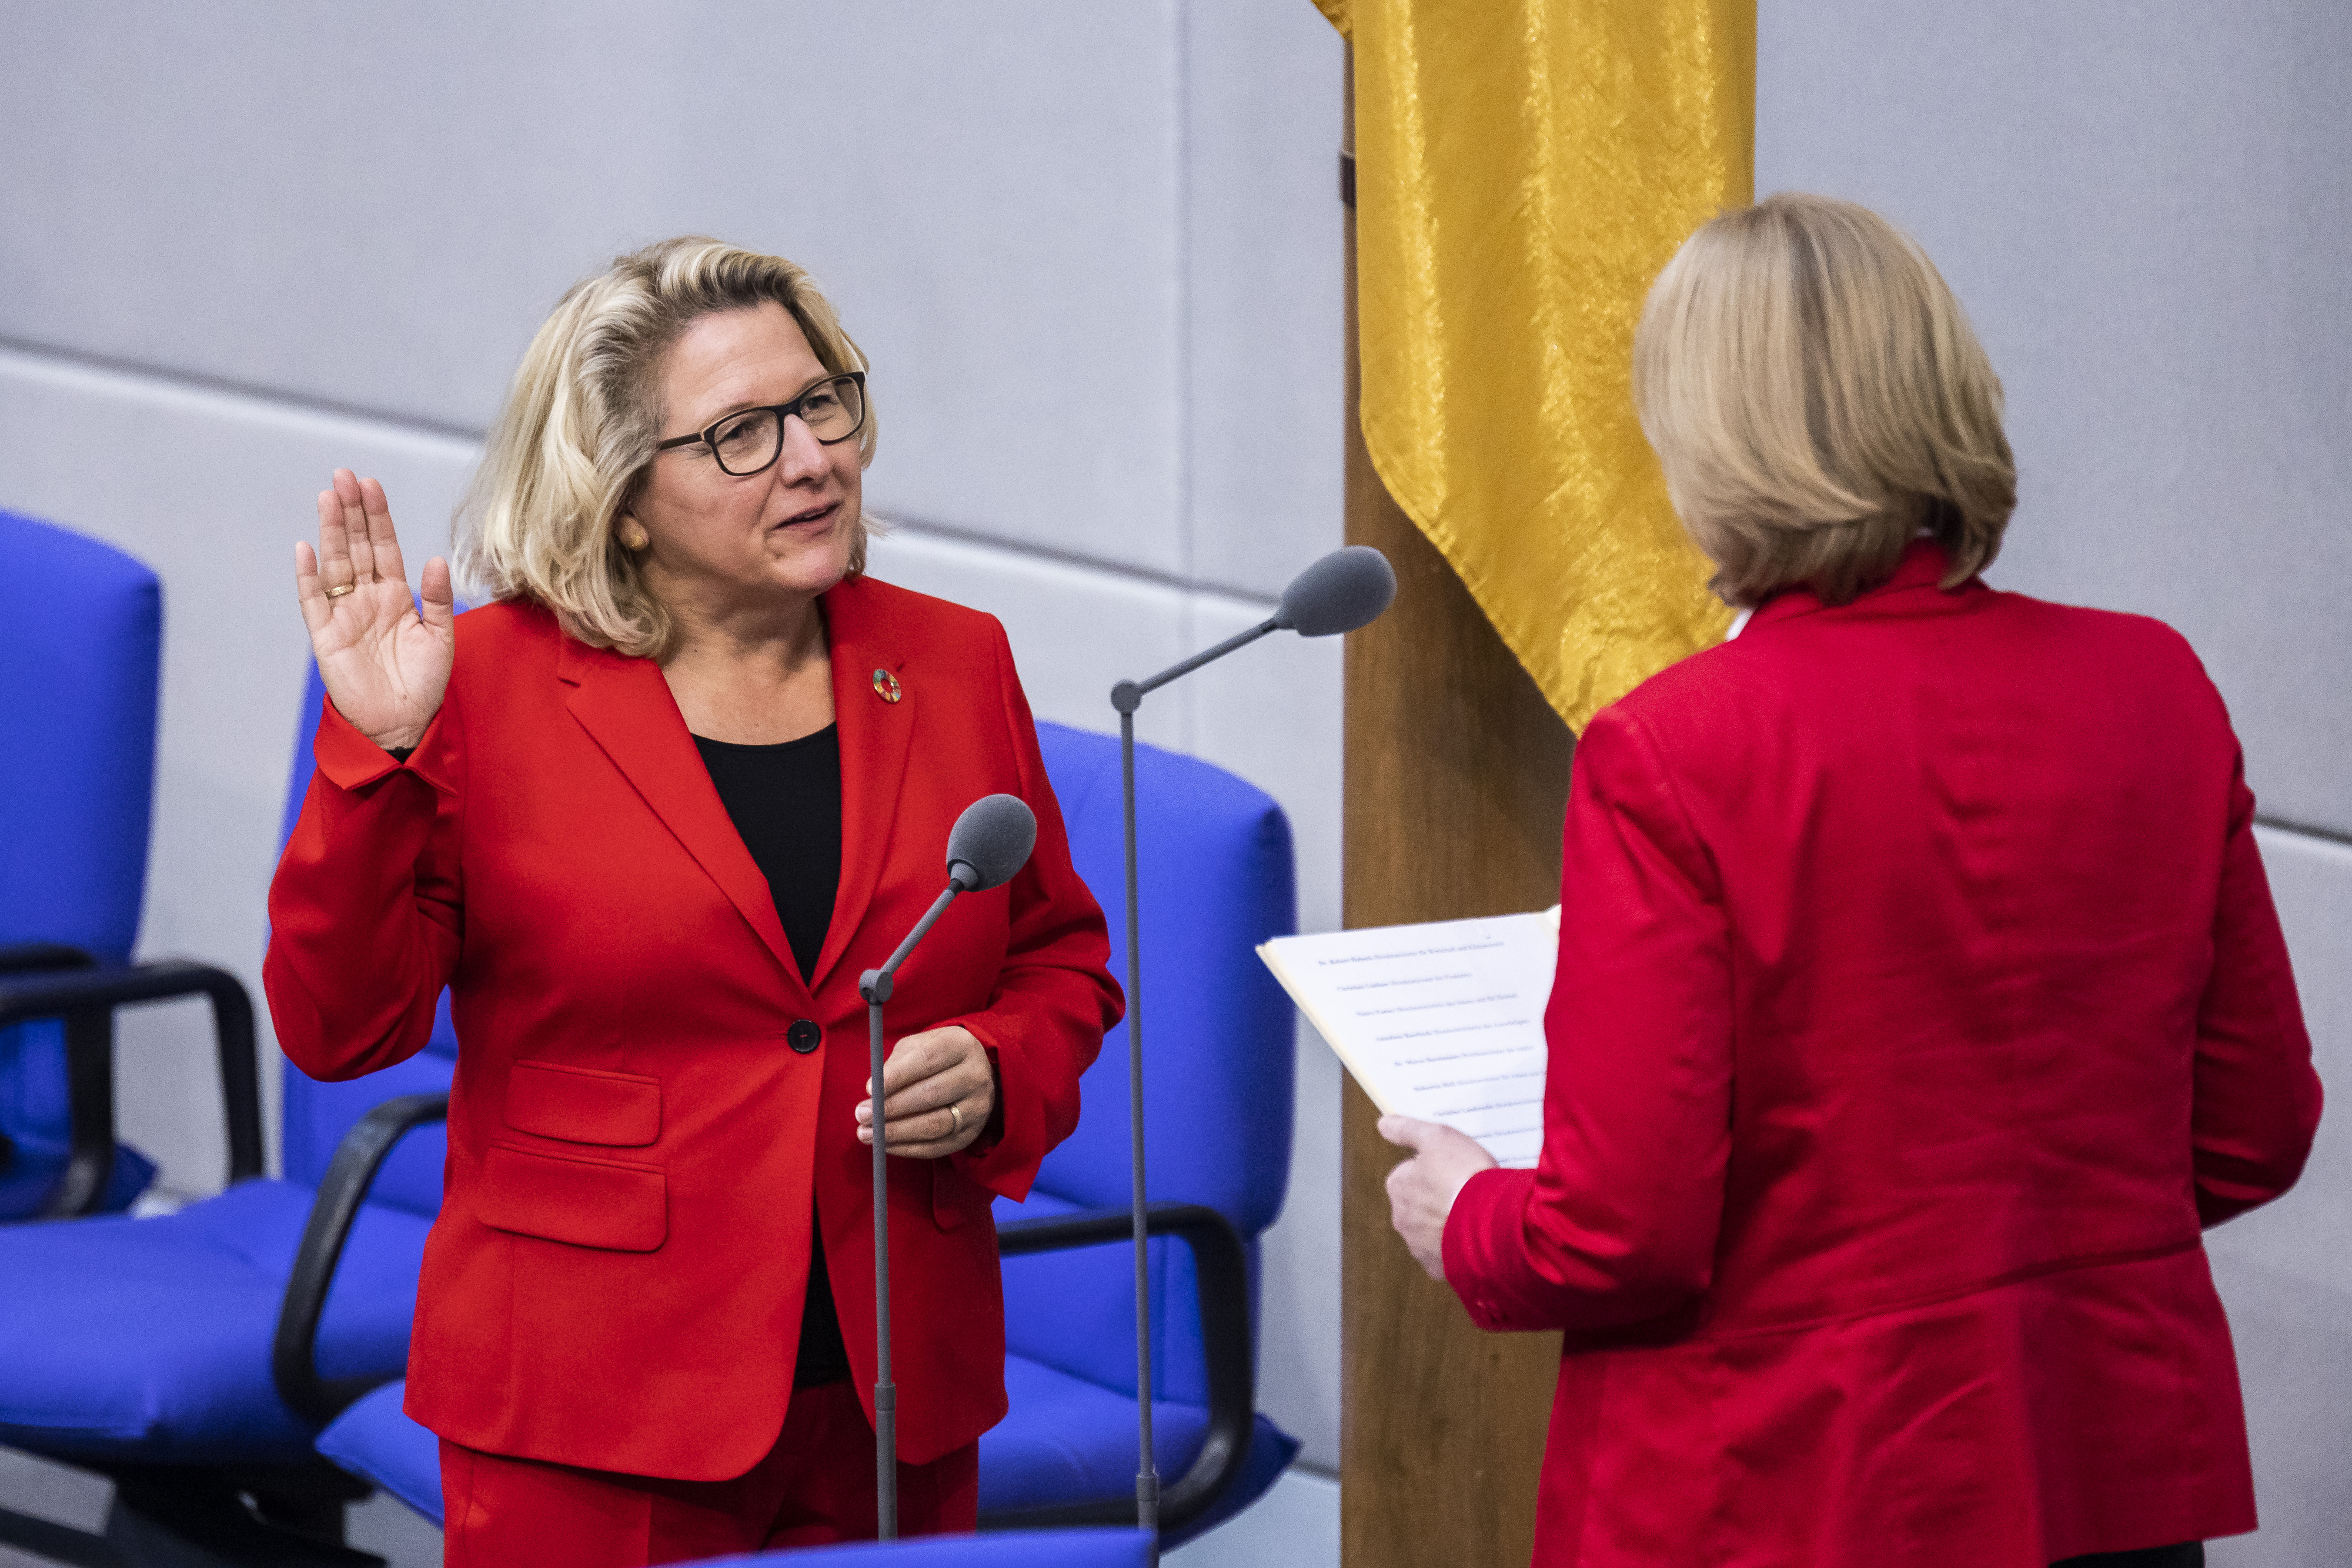 Federal Development Minister Svenja Schulze is sworn in by Parlament President Bärbel Bas in front of the German parliament.